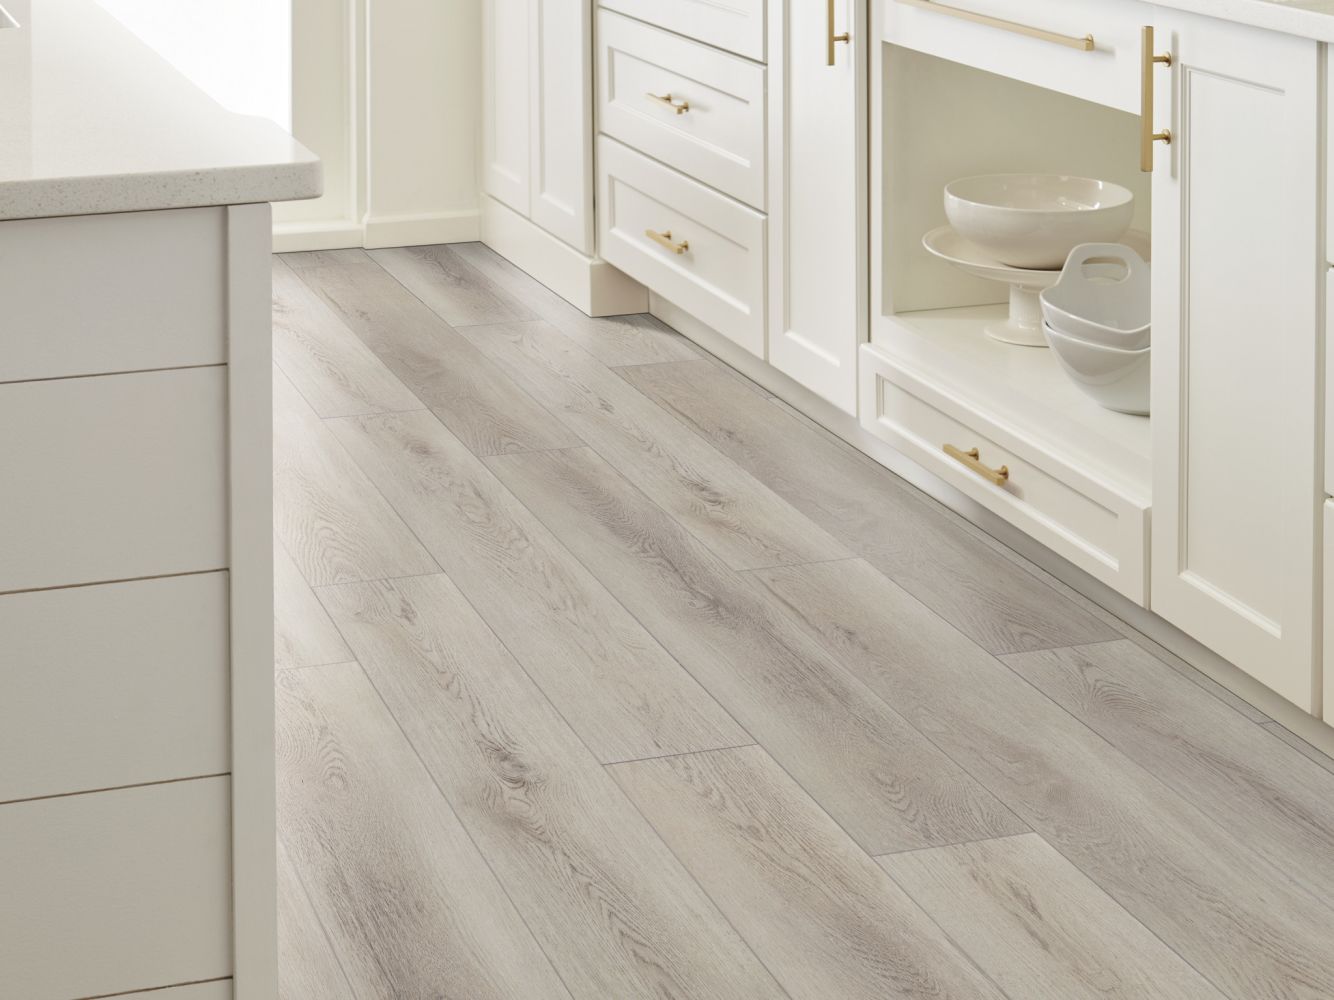 Shaw Floors Resilient Residential Paladin Plus Warm Grey 05220_0278V